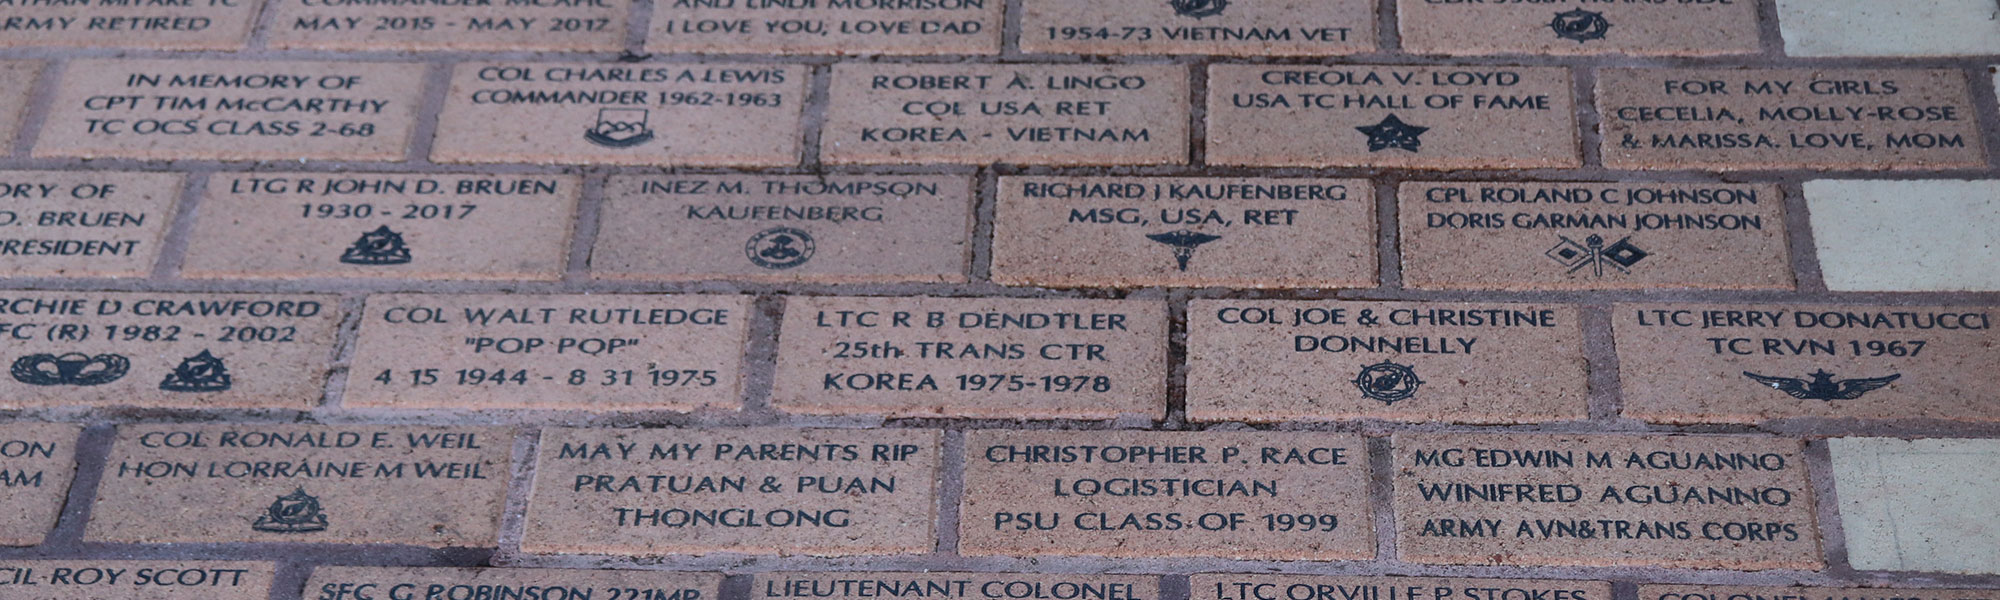 Image of the Bricks that contain names of individual donors who are friend of the TC Museum.